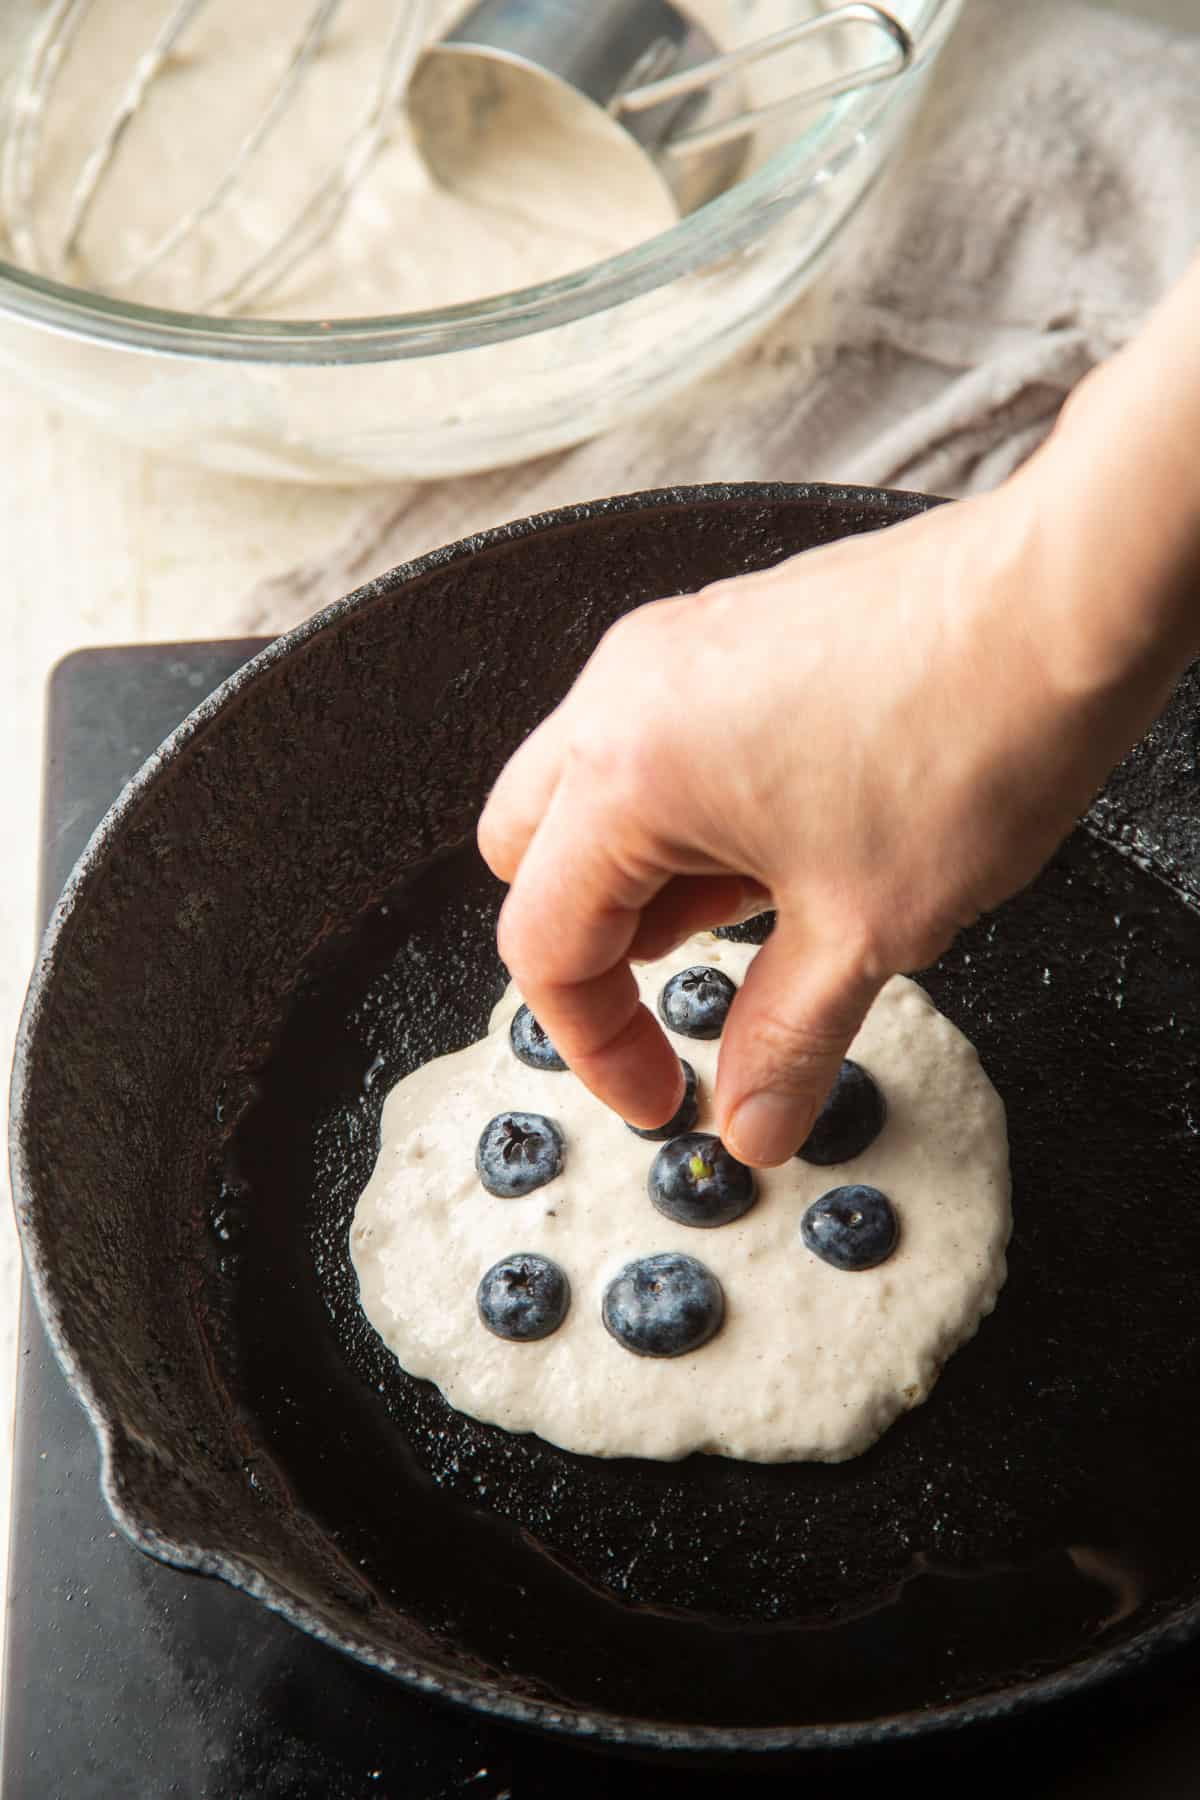 Hand arranging blueberries over a dollop of pancake batter cooking in a skillet.